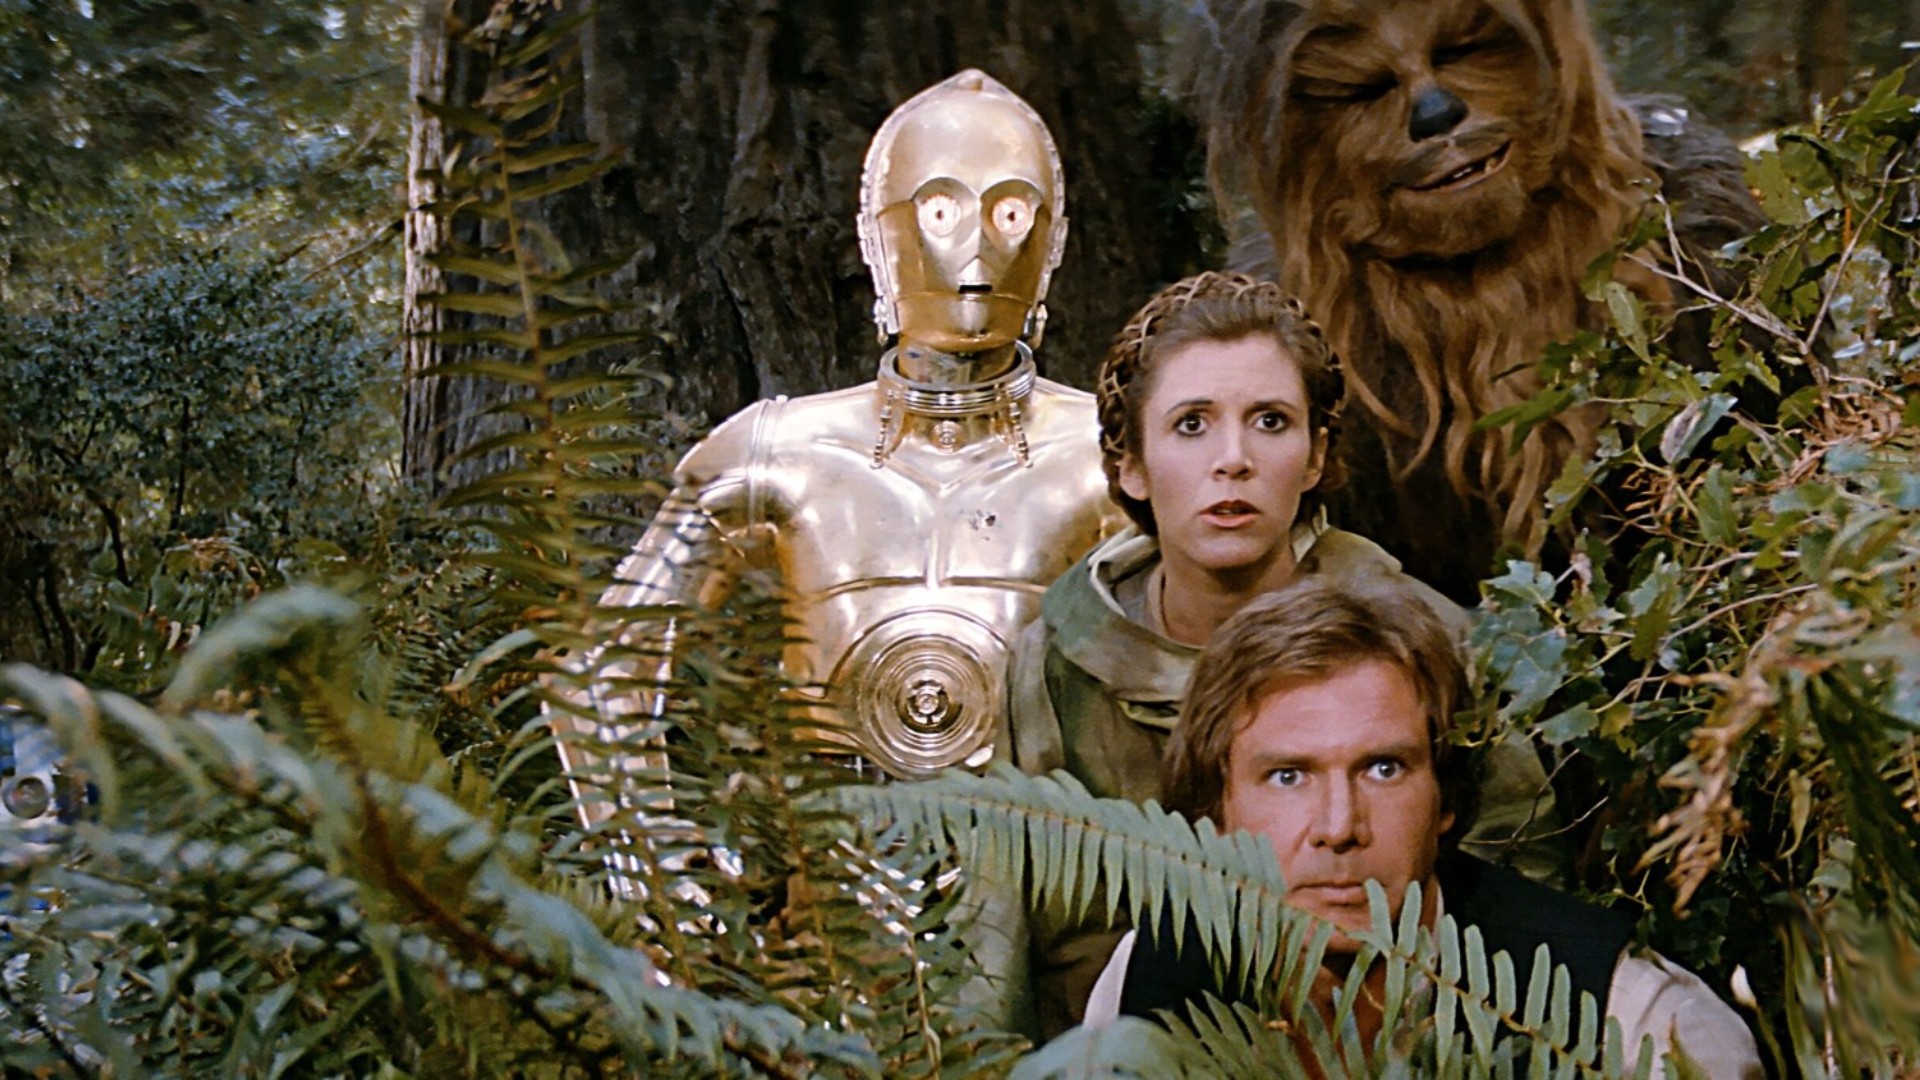  The 40th anniversary of Return of the Jedi has everyone reminiscing about their first watch 